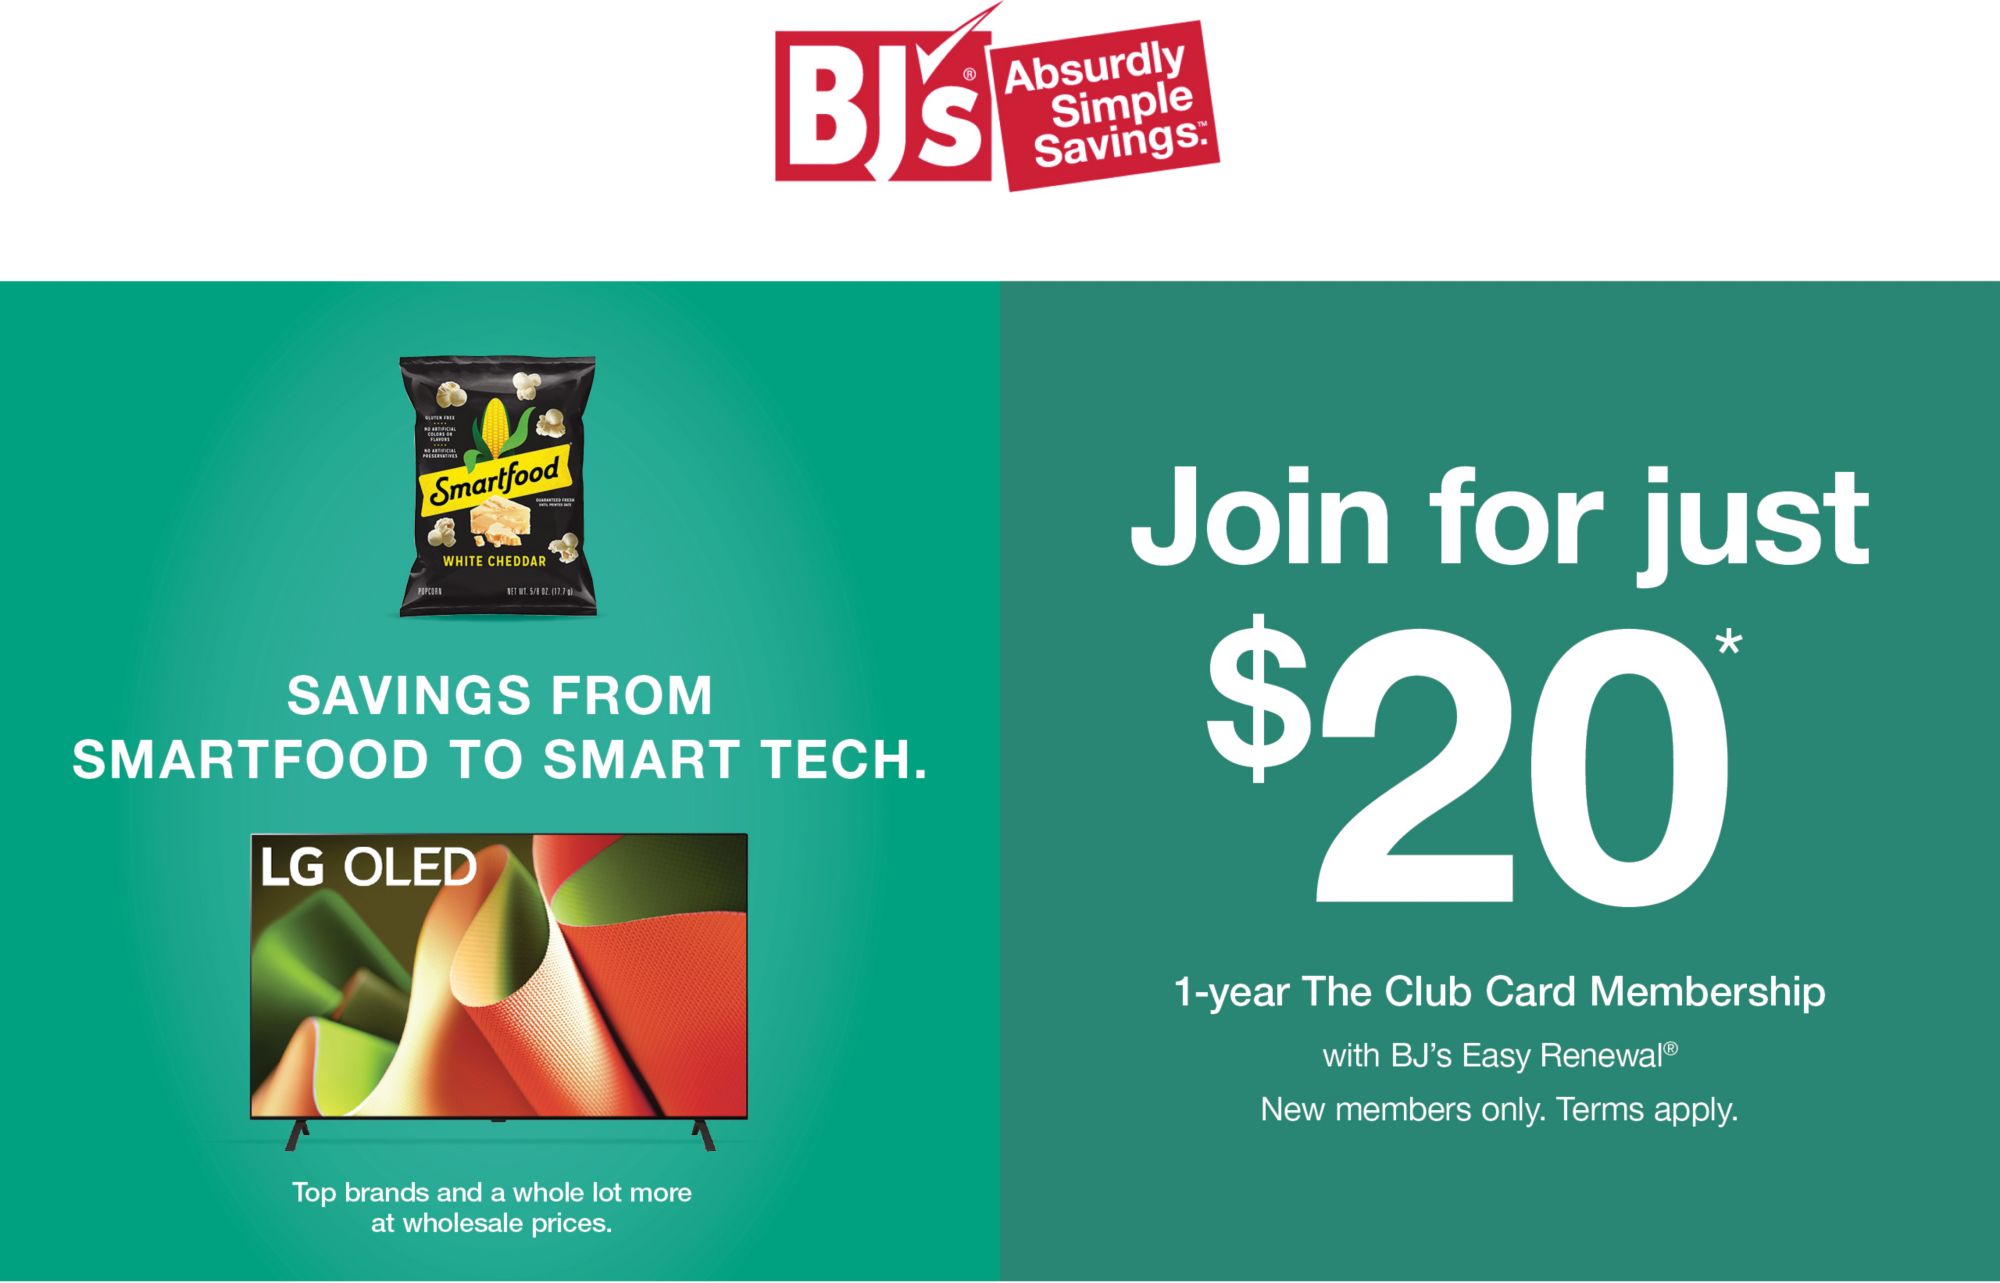 BJ's Absurdly Simple Savings. Join now for just $25. that's over 50% off! (Reg. $55). 1-year BJ's Inner Circle or Business Membership. New members only.